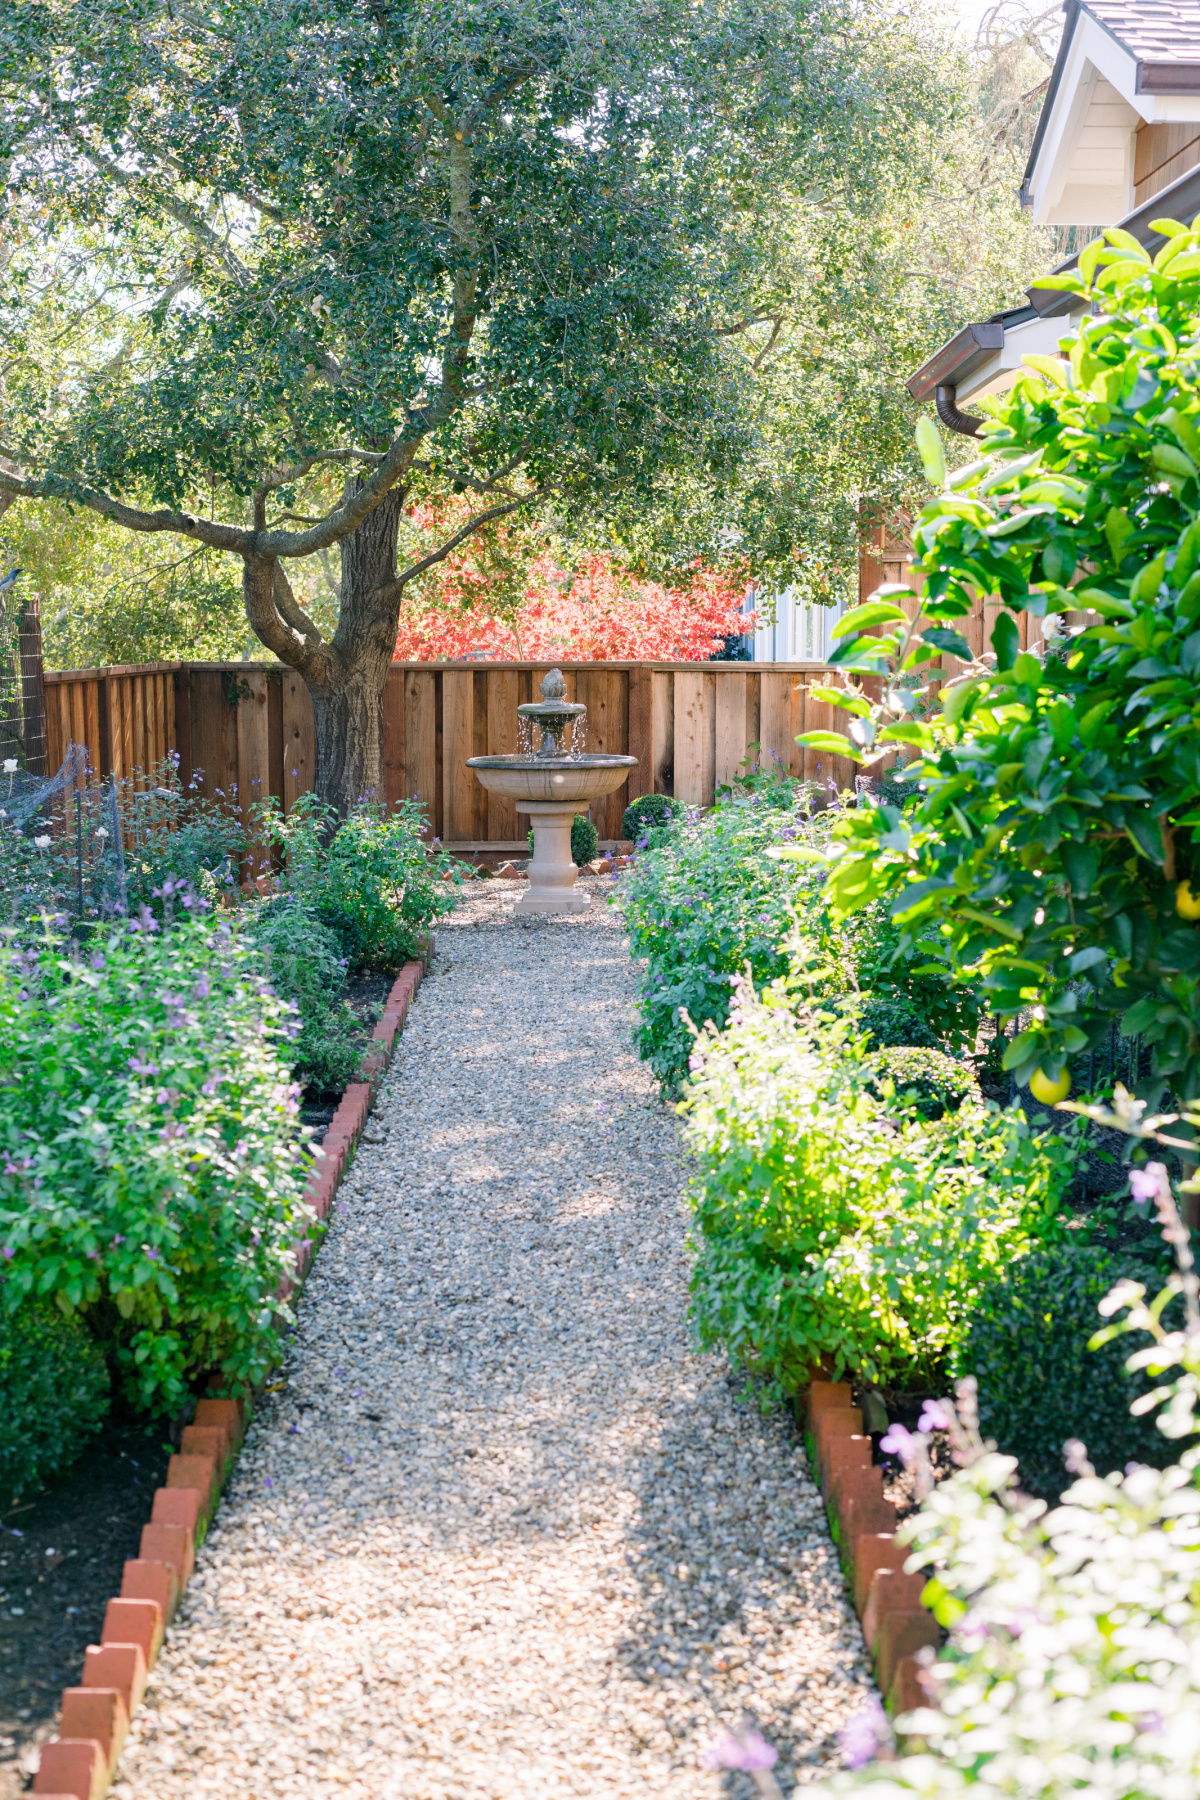 Gravel path surrounded by garden plants and bird bath fountain at end of path.